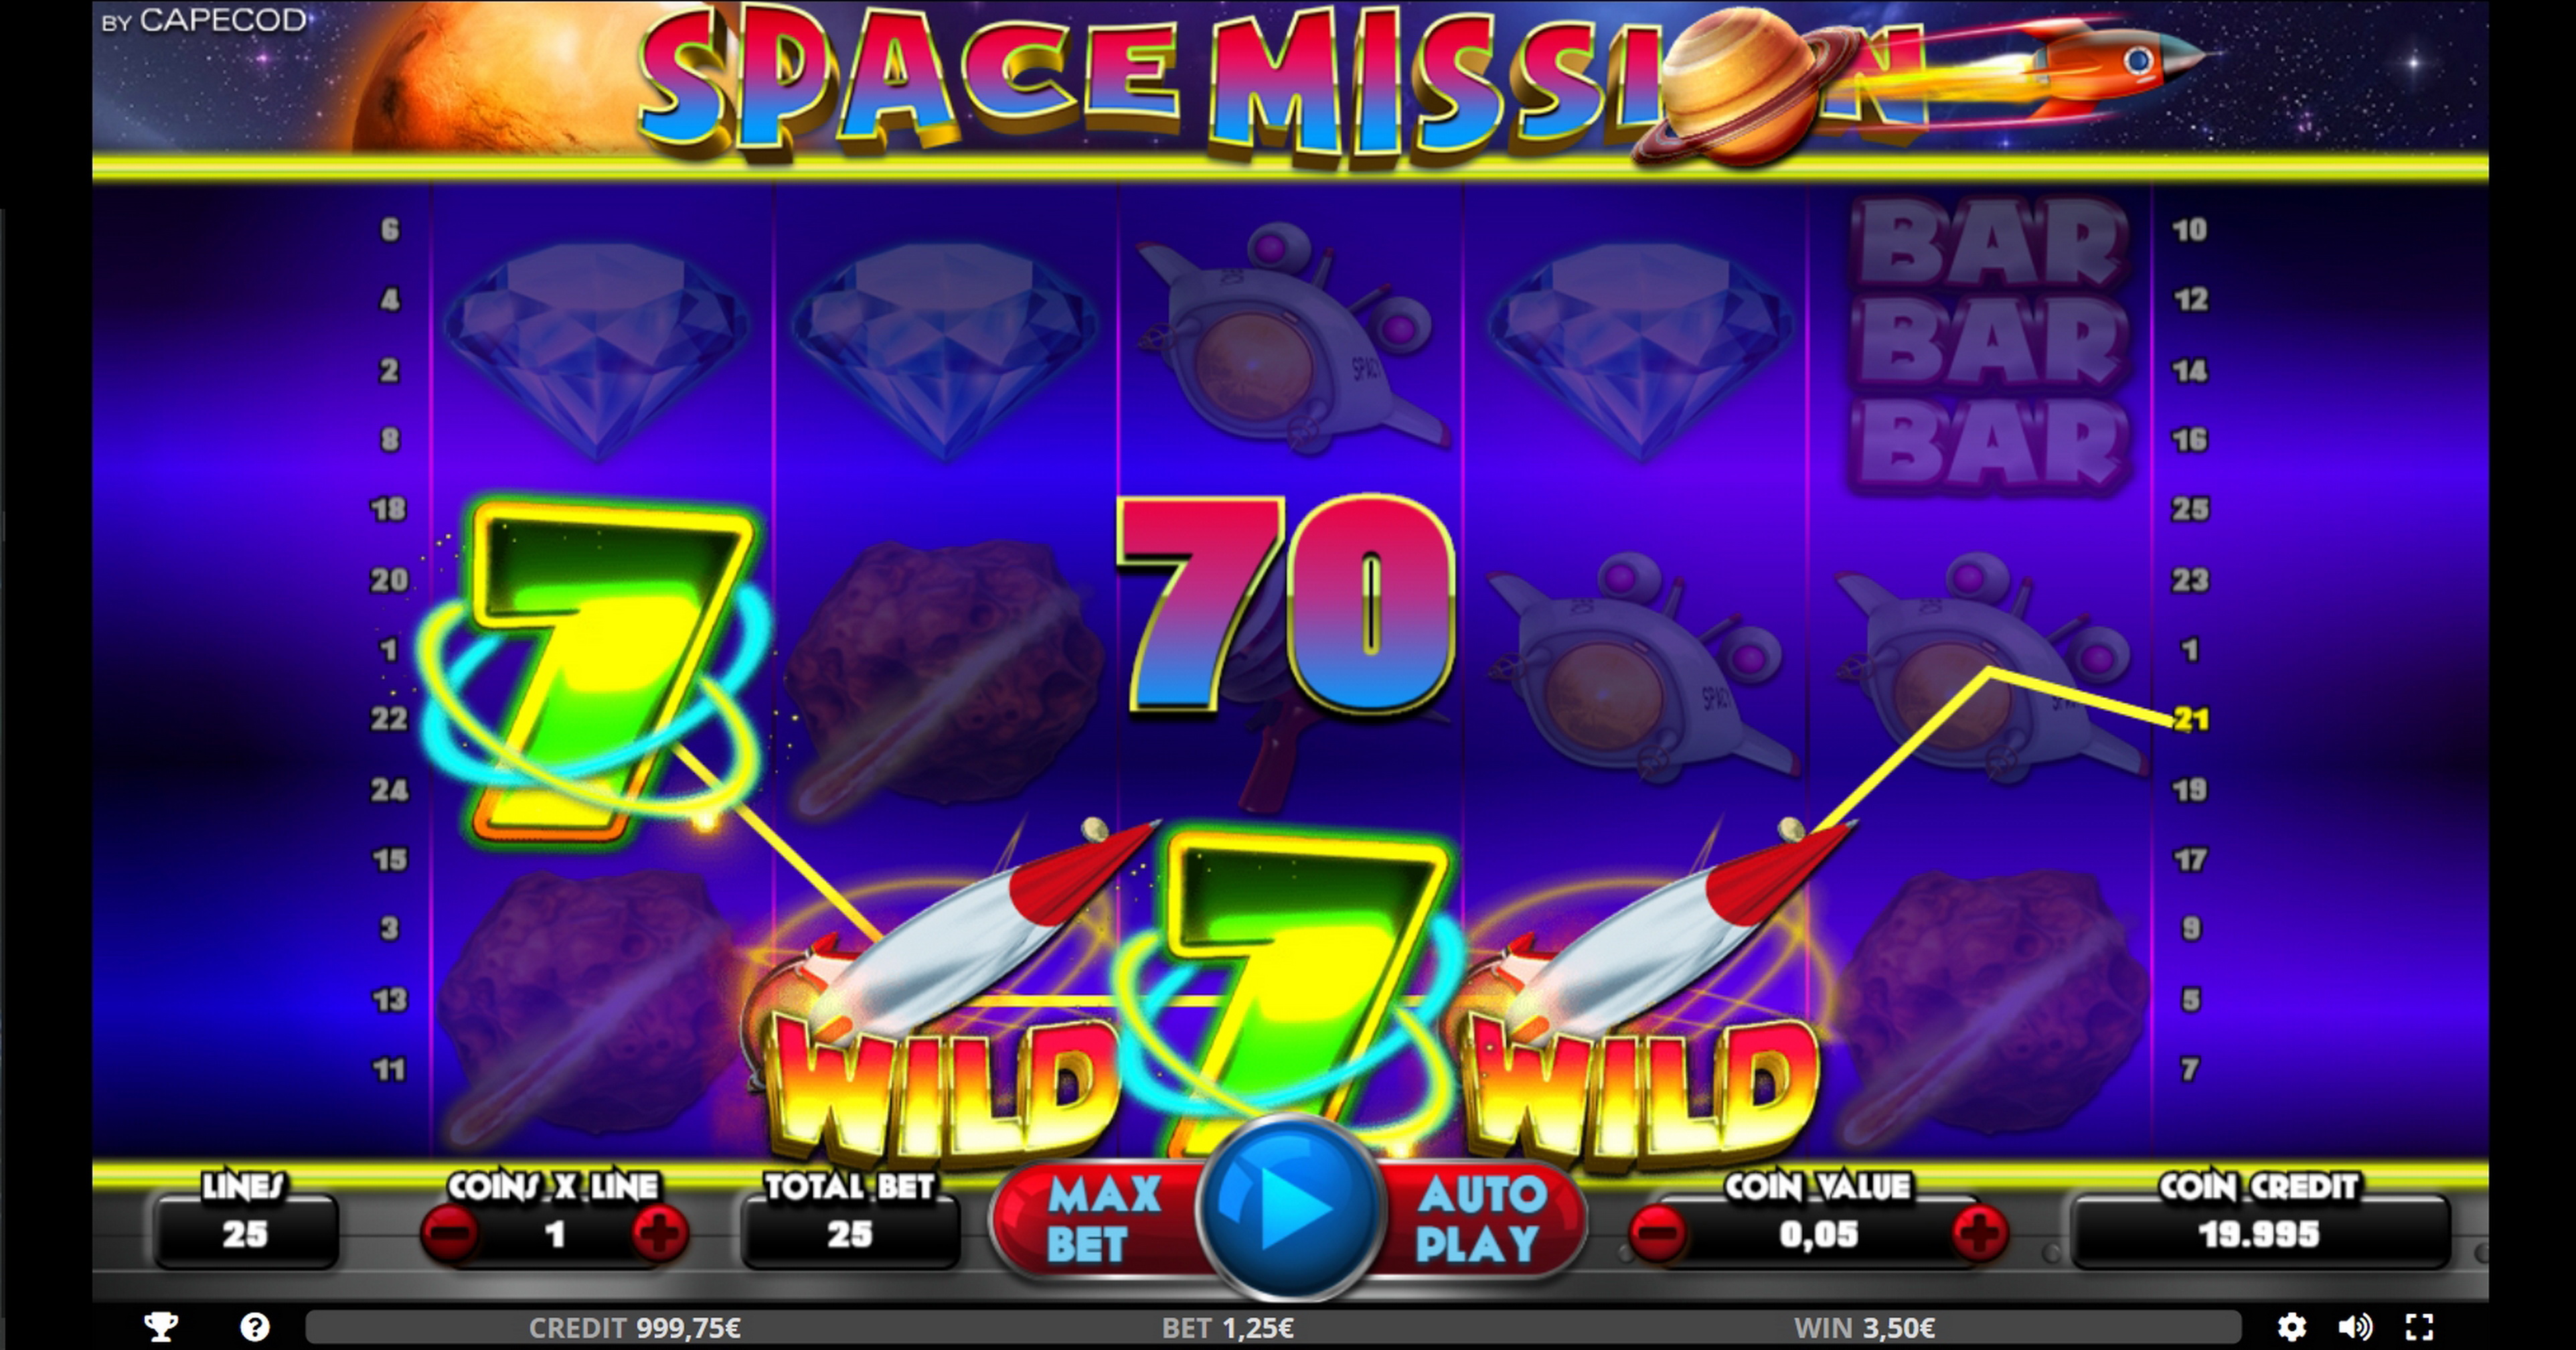 Win Money in Space Mission Free Slot Game by Capecod Gaming